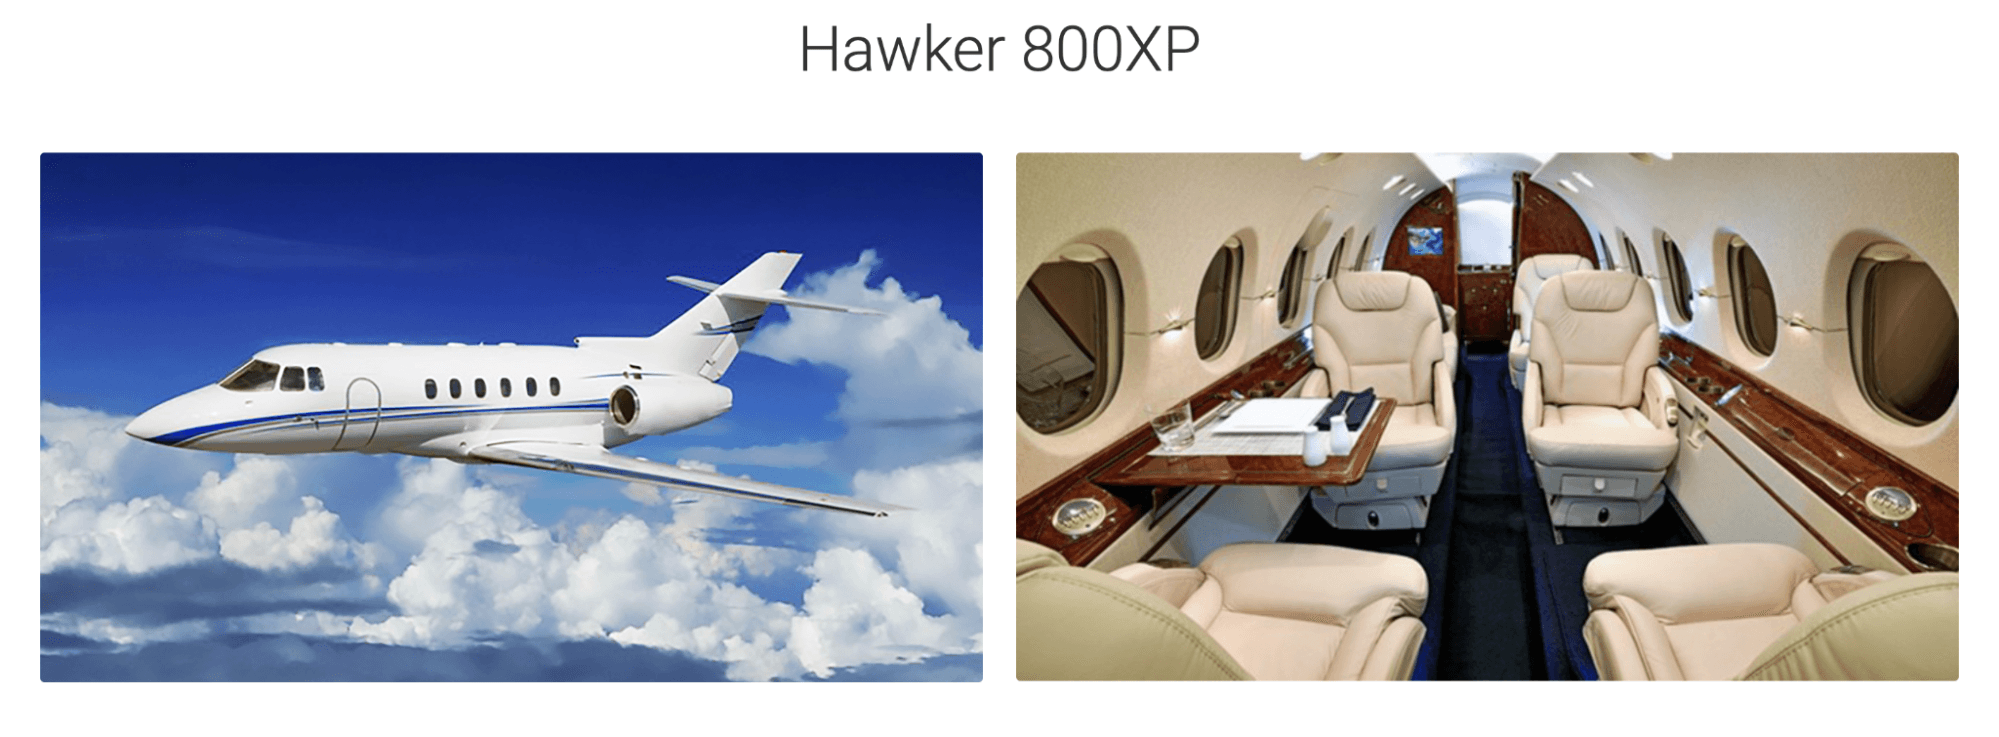 The picture shows the interior and exterior of Hawker 800XP jets available from JetOptions.